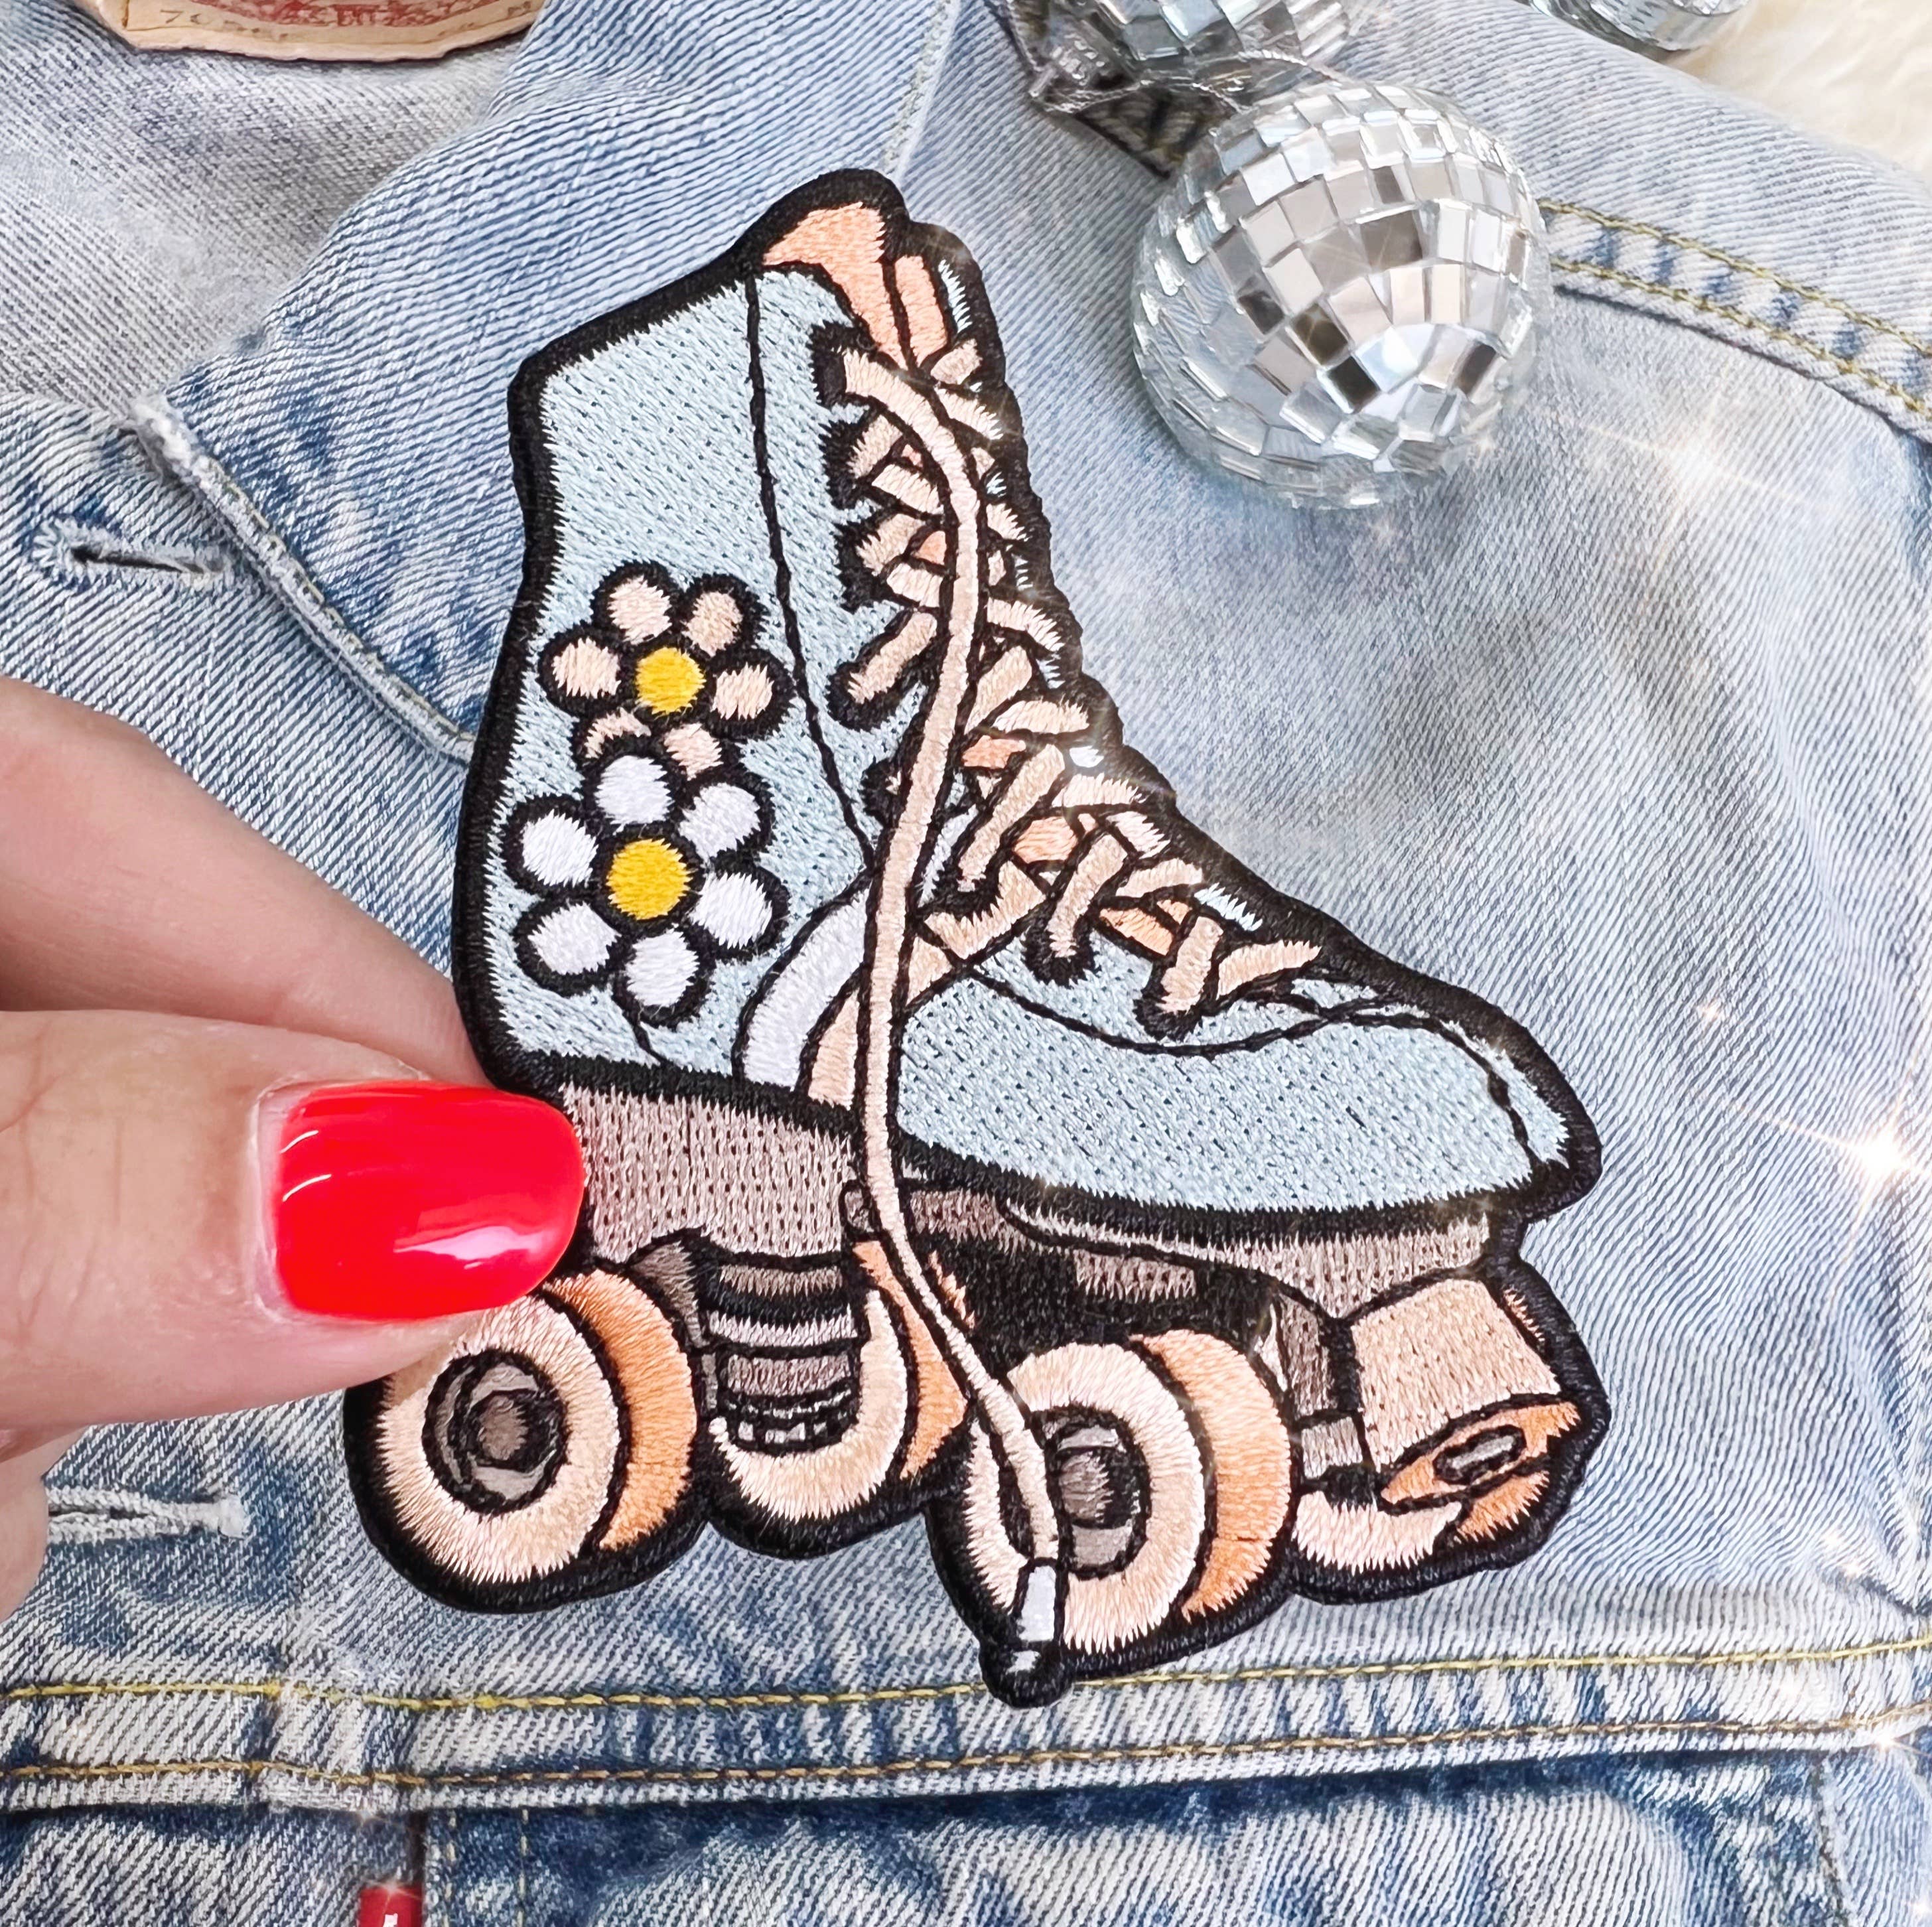 Roller Skate Patches